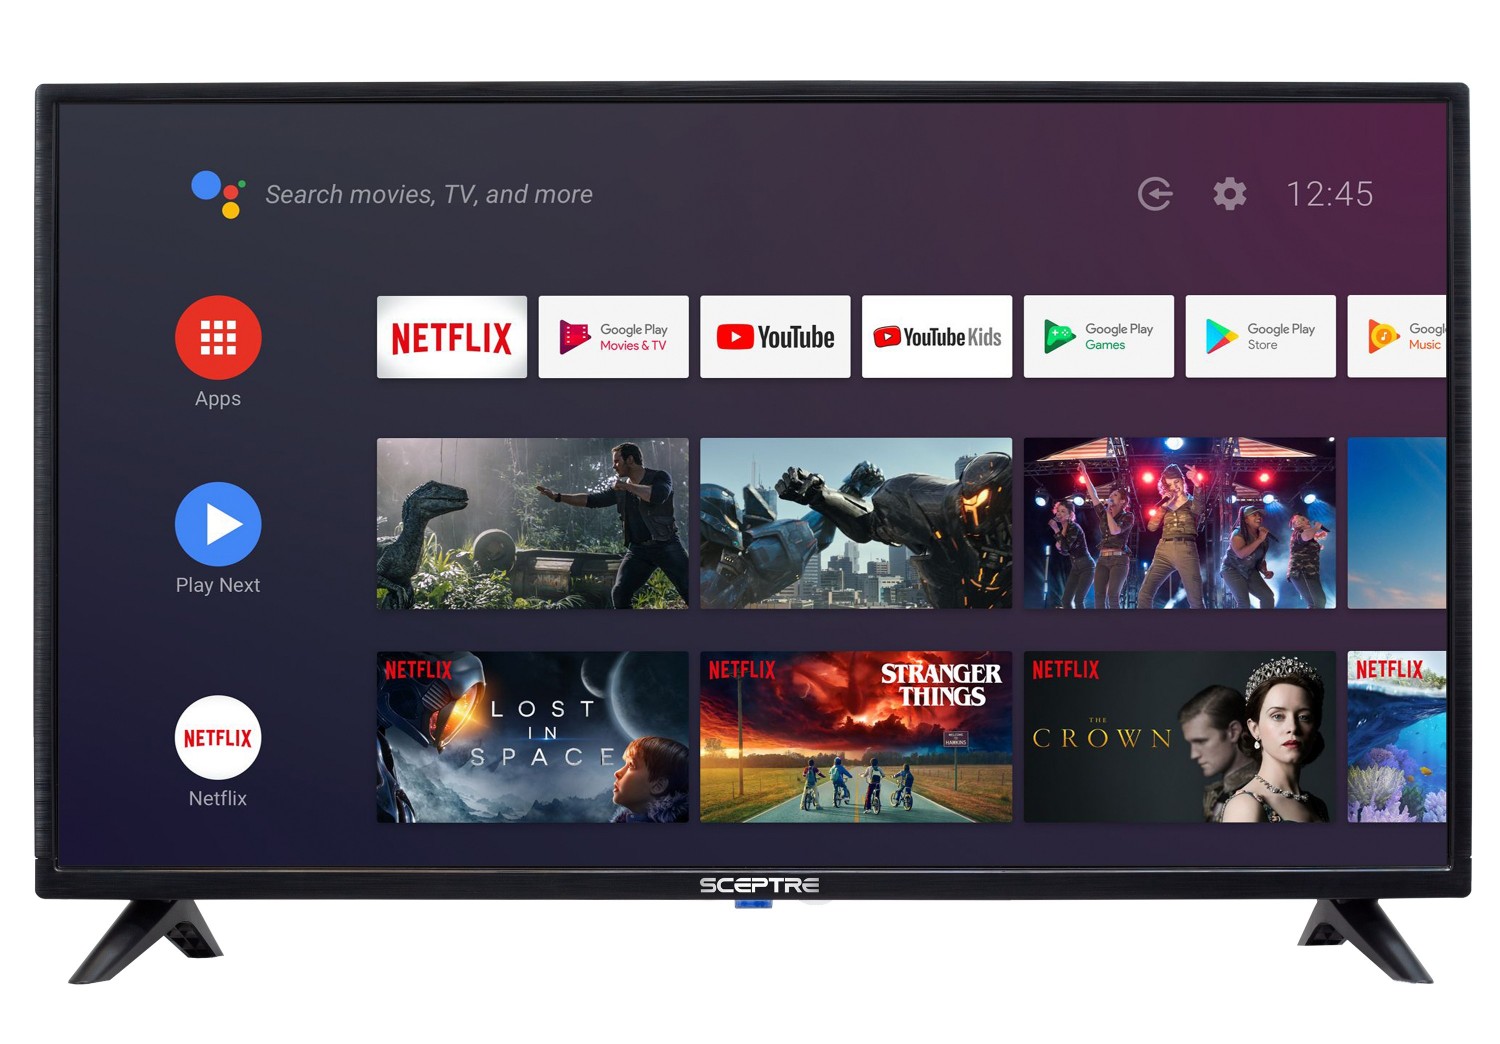 Sceptre 32" Class HD (720p) Android Smart LED TV with Google Assistant (A328BV-SR) - image 1 of 5